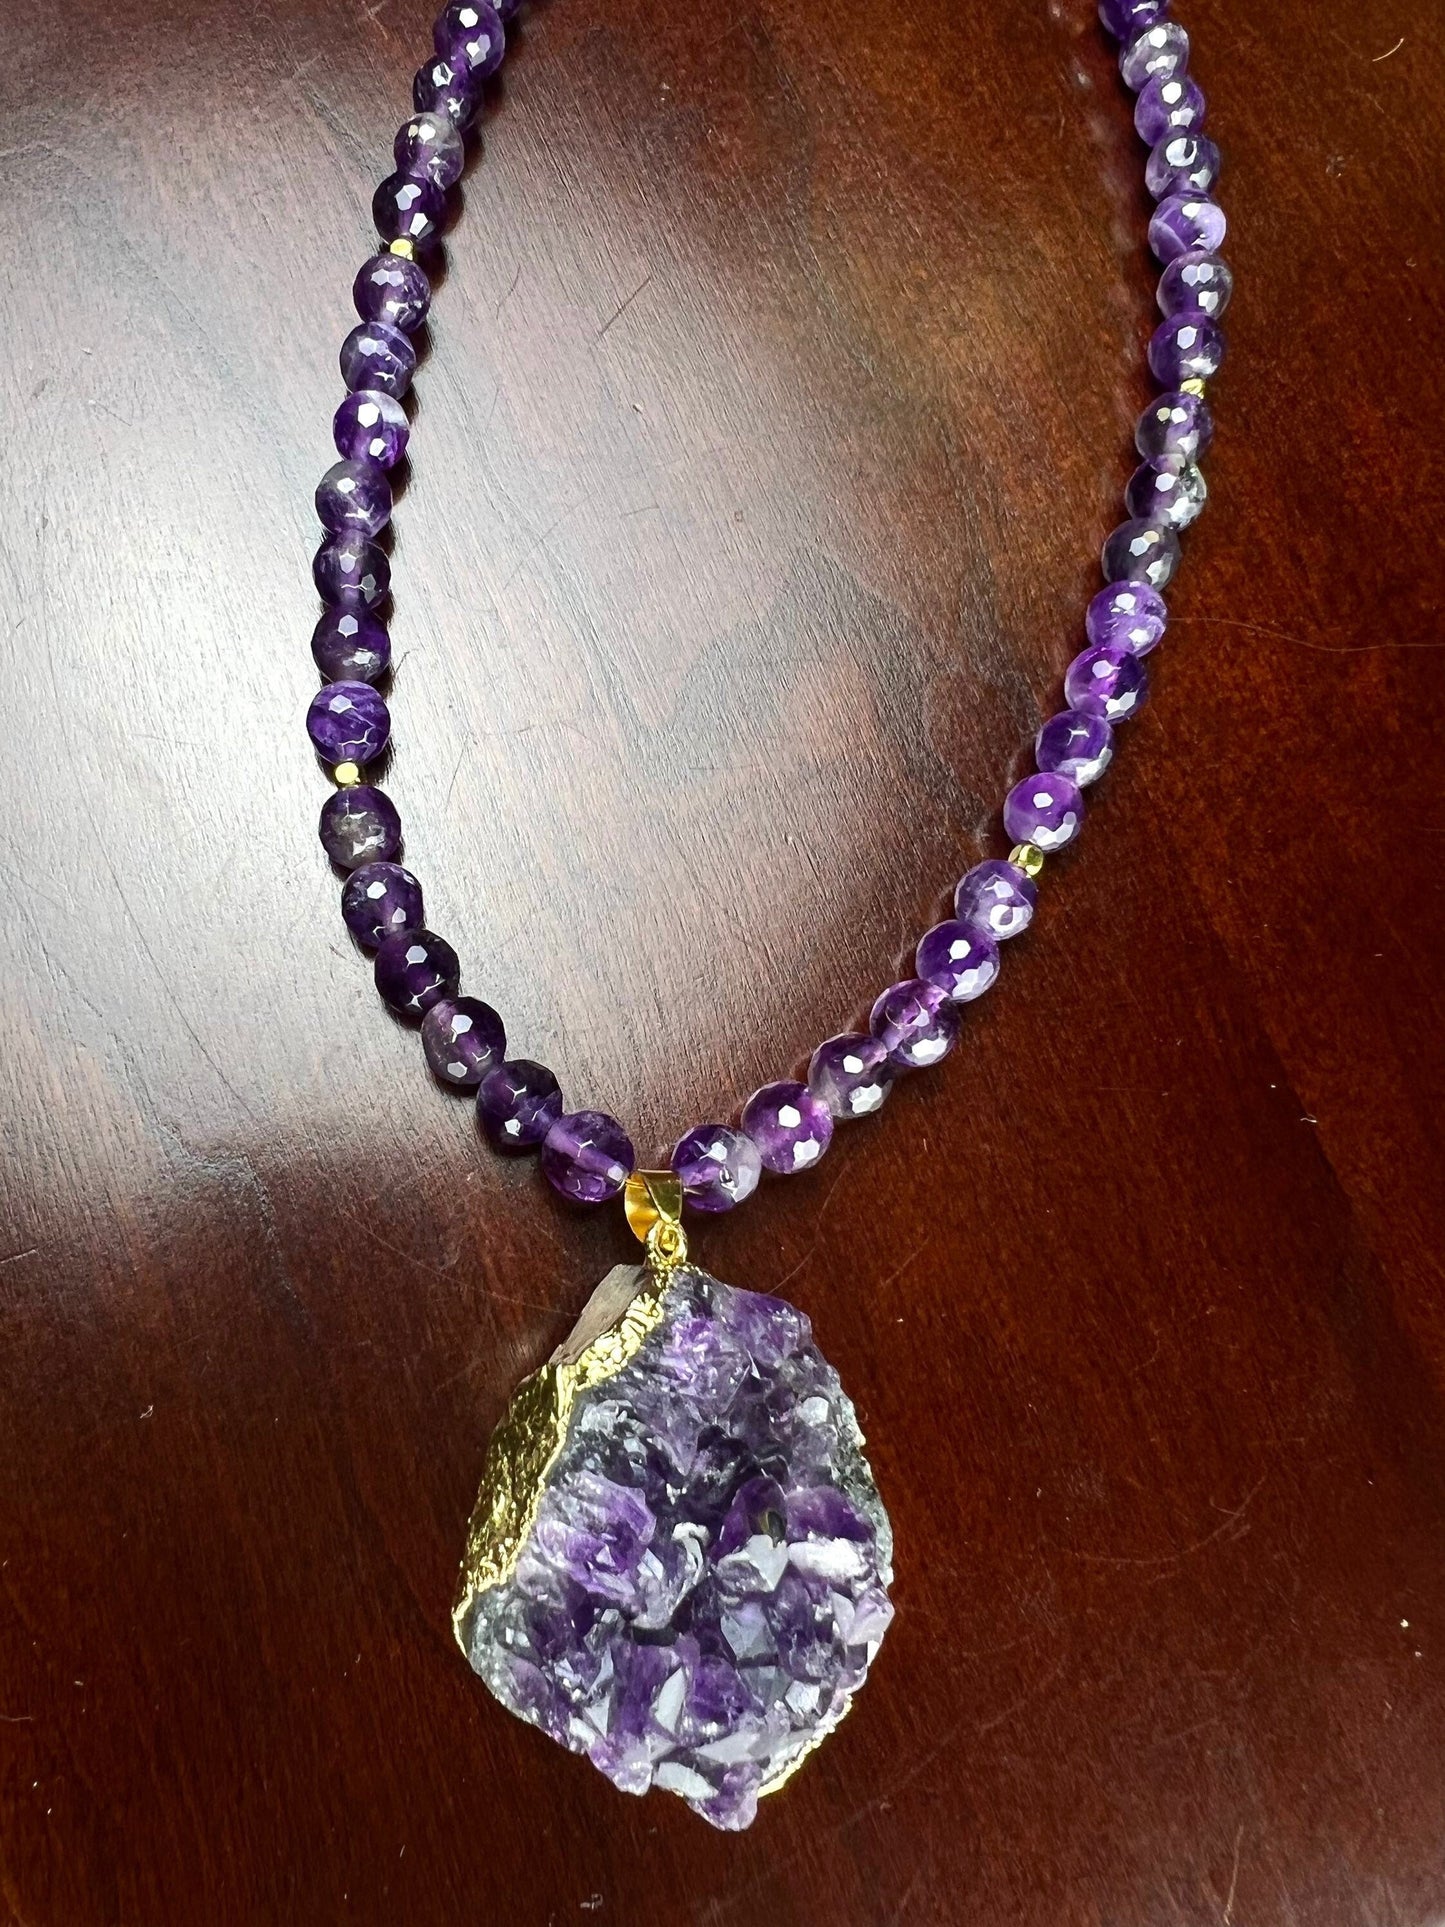 Amethyst Geode Gold Plated Druzy Chunk 36x41mm long , 23mm thick Pendant, 8mm Natural Faceted Amethyst bead 18” Necklace 2&quot; Extension Chain